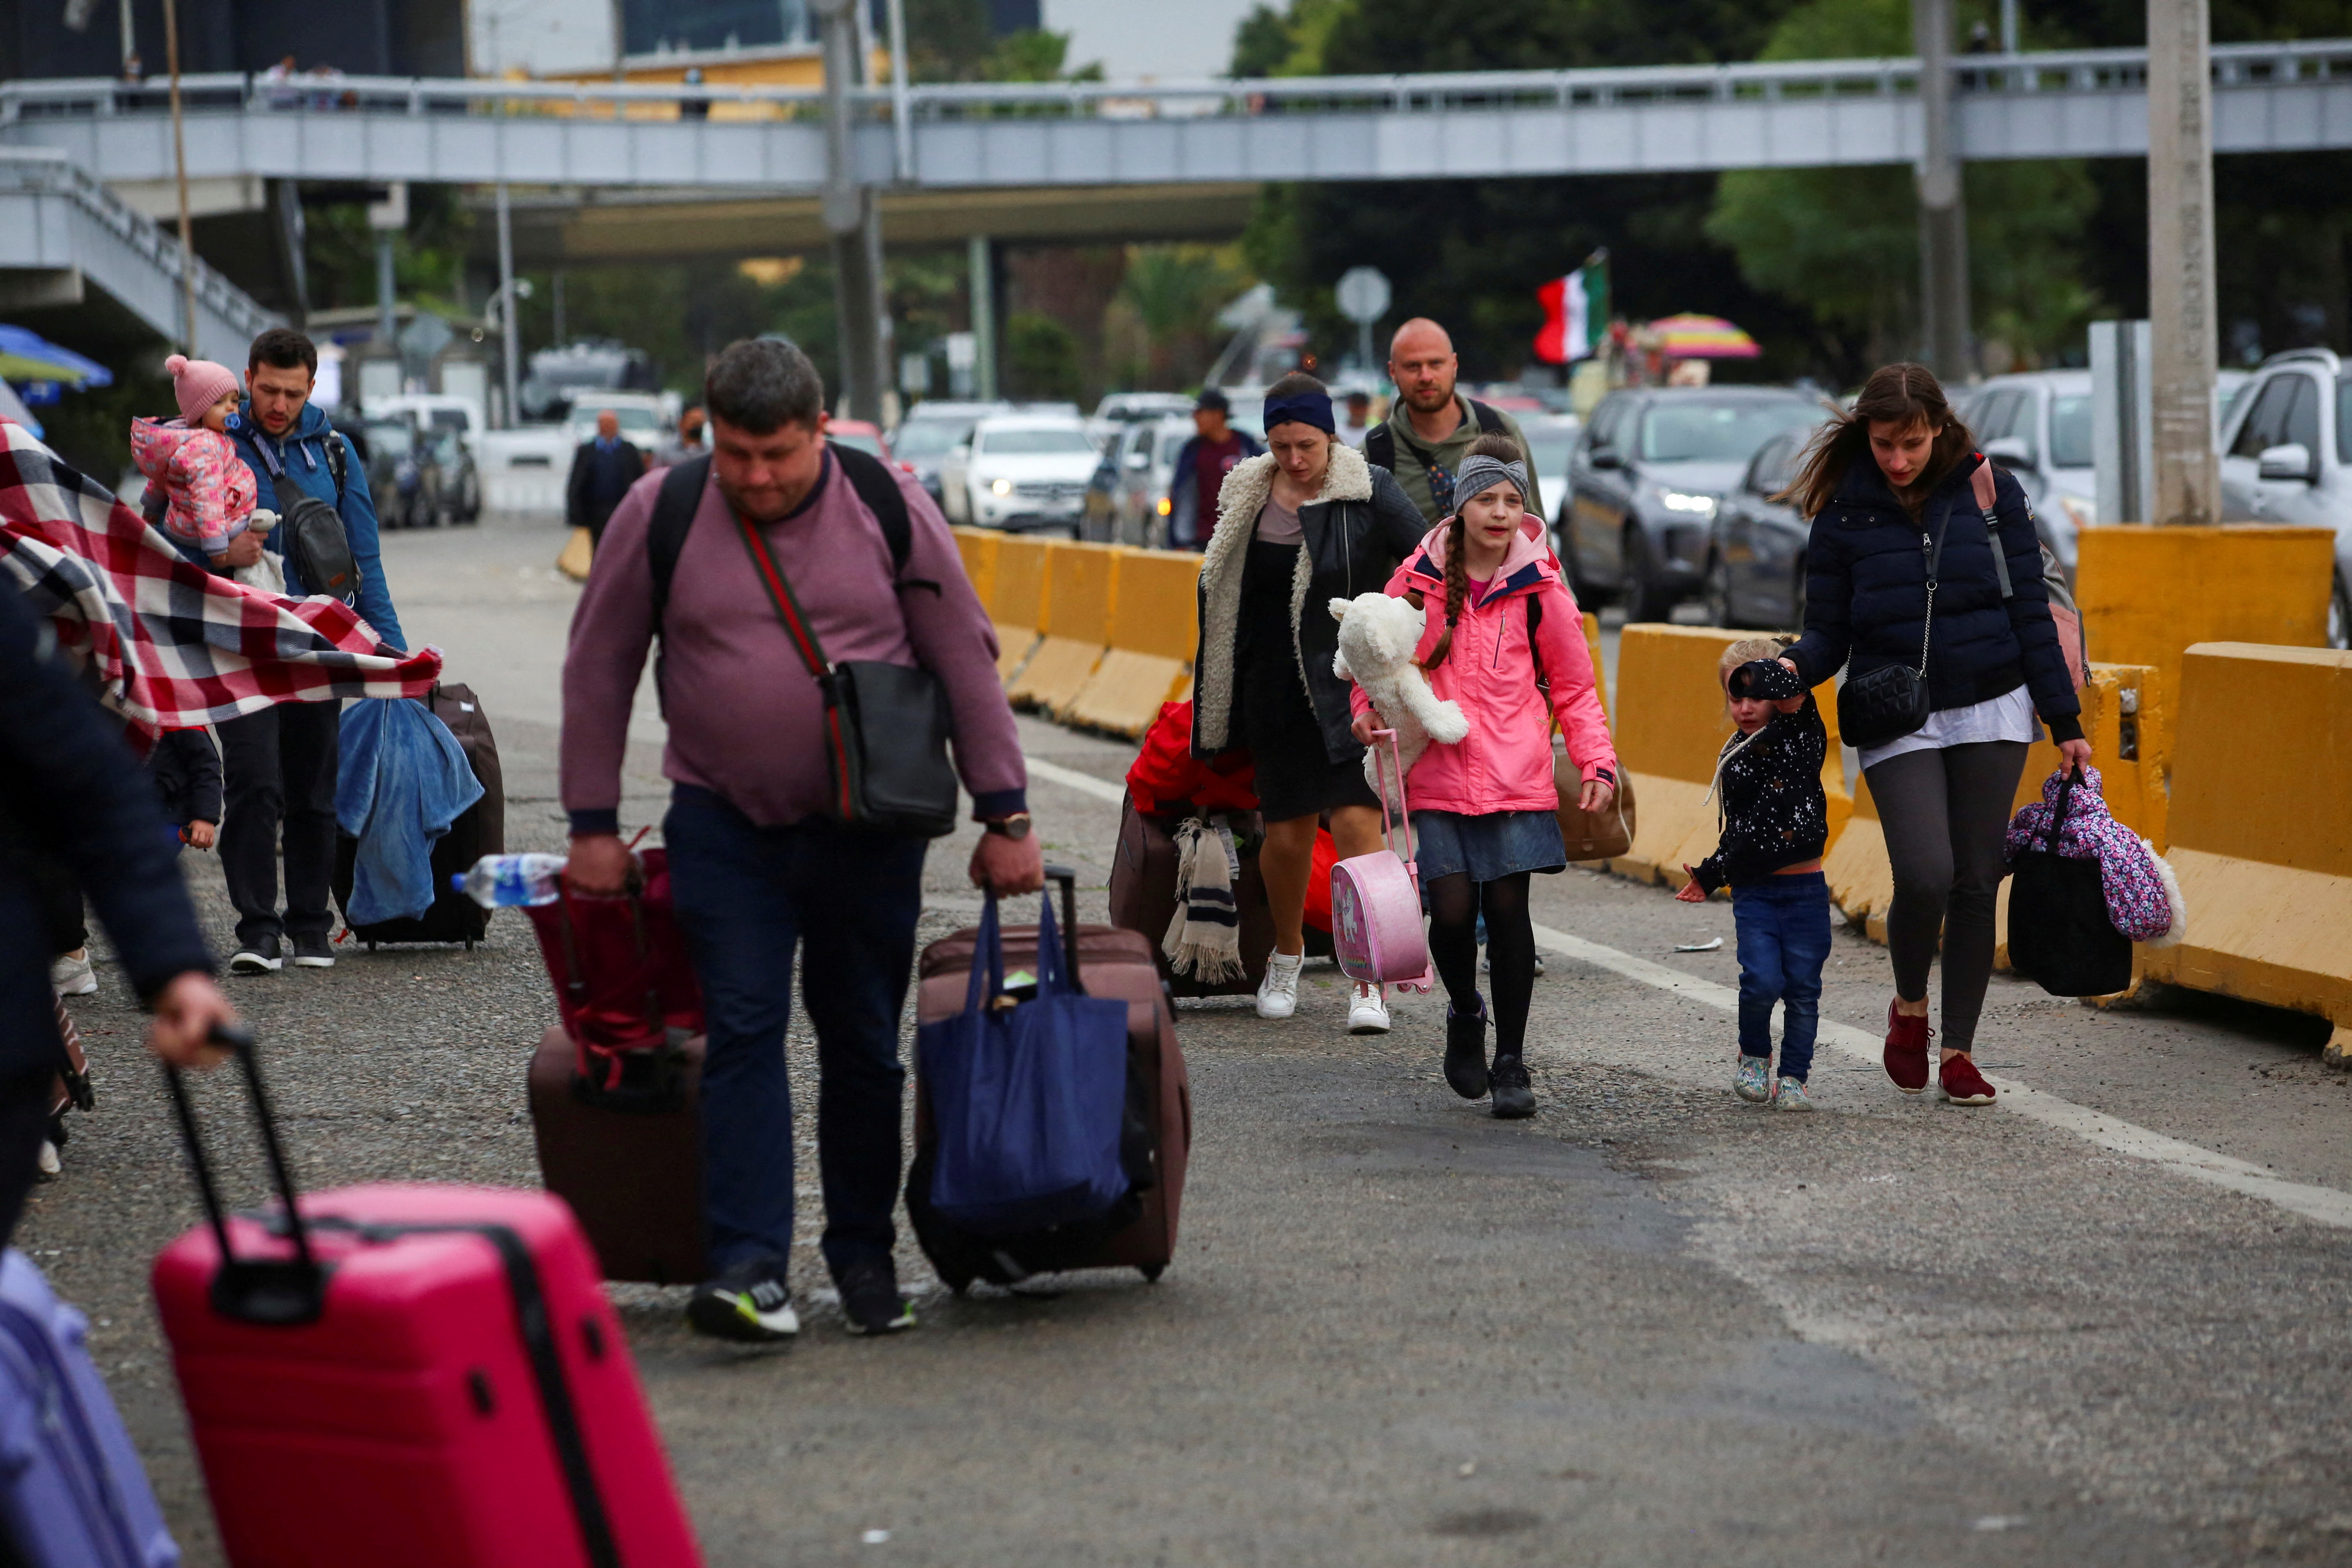 Ukrainians who fled to Mexico amid Russia's invasion of their homeland, walk with their belongings to cross the San Ysidro Land Port of Entry of the U.S.-Mexico border, in Tijuana